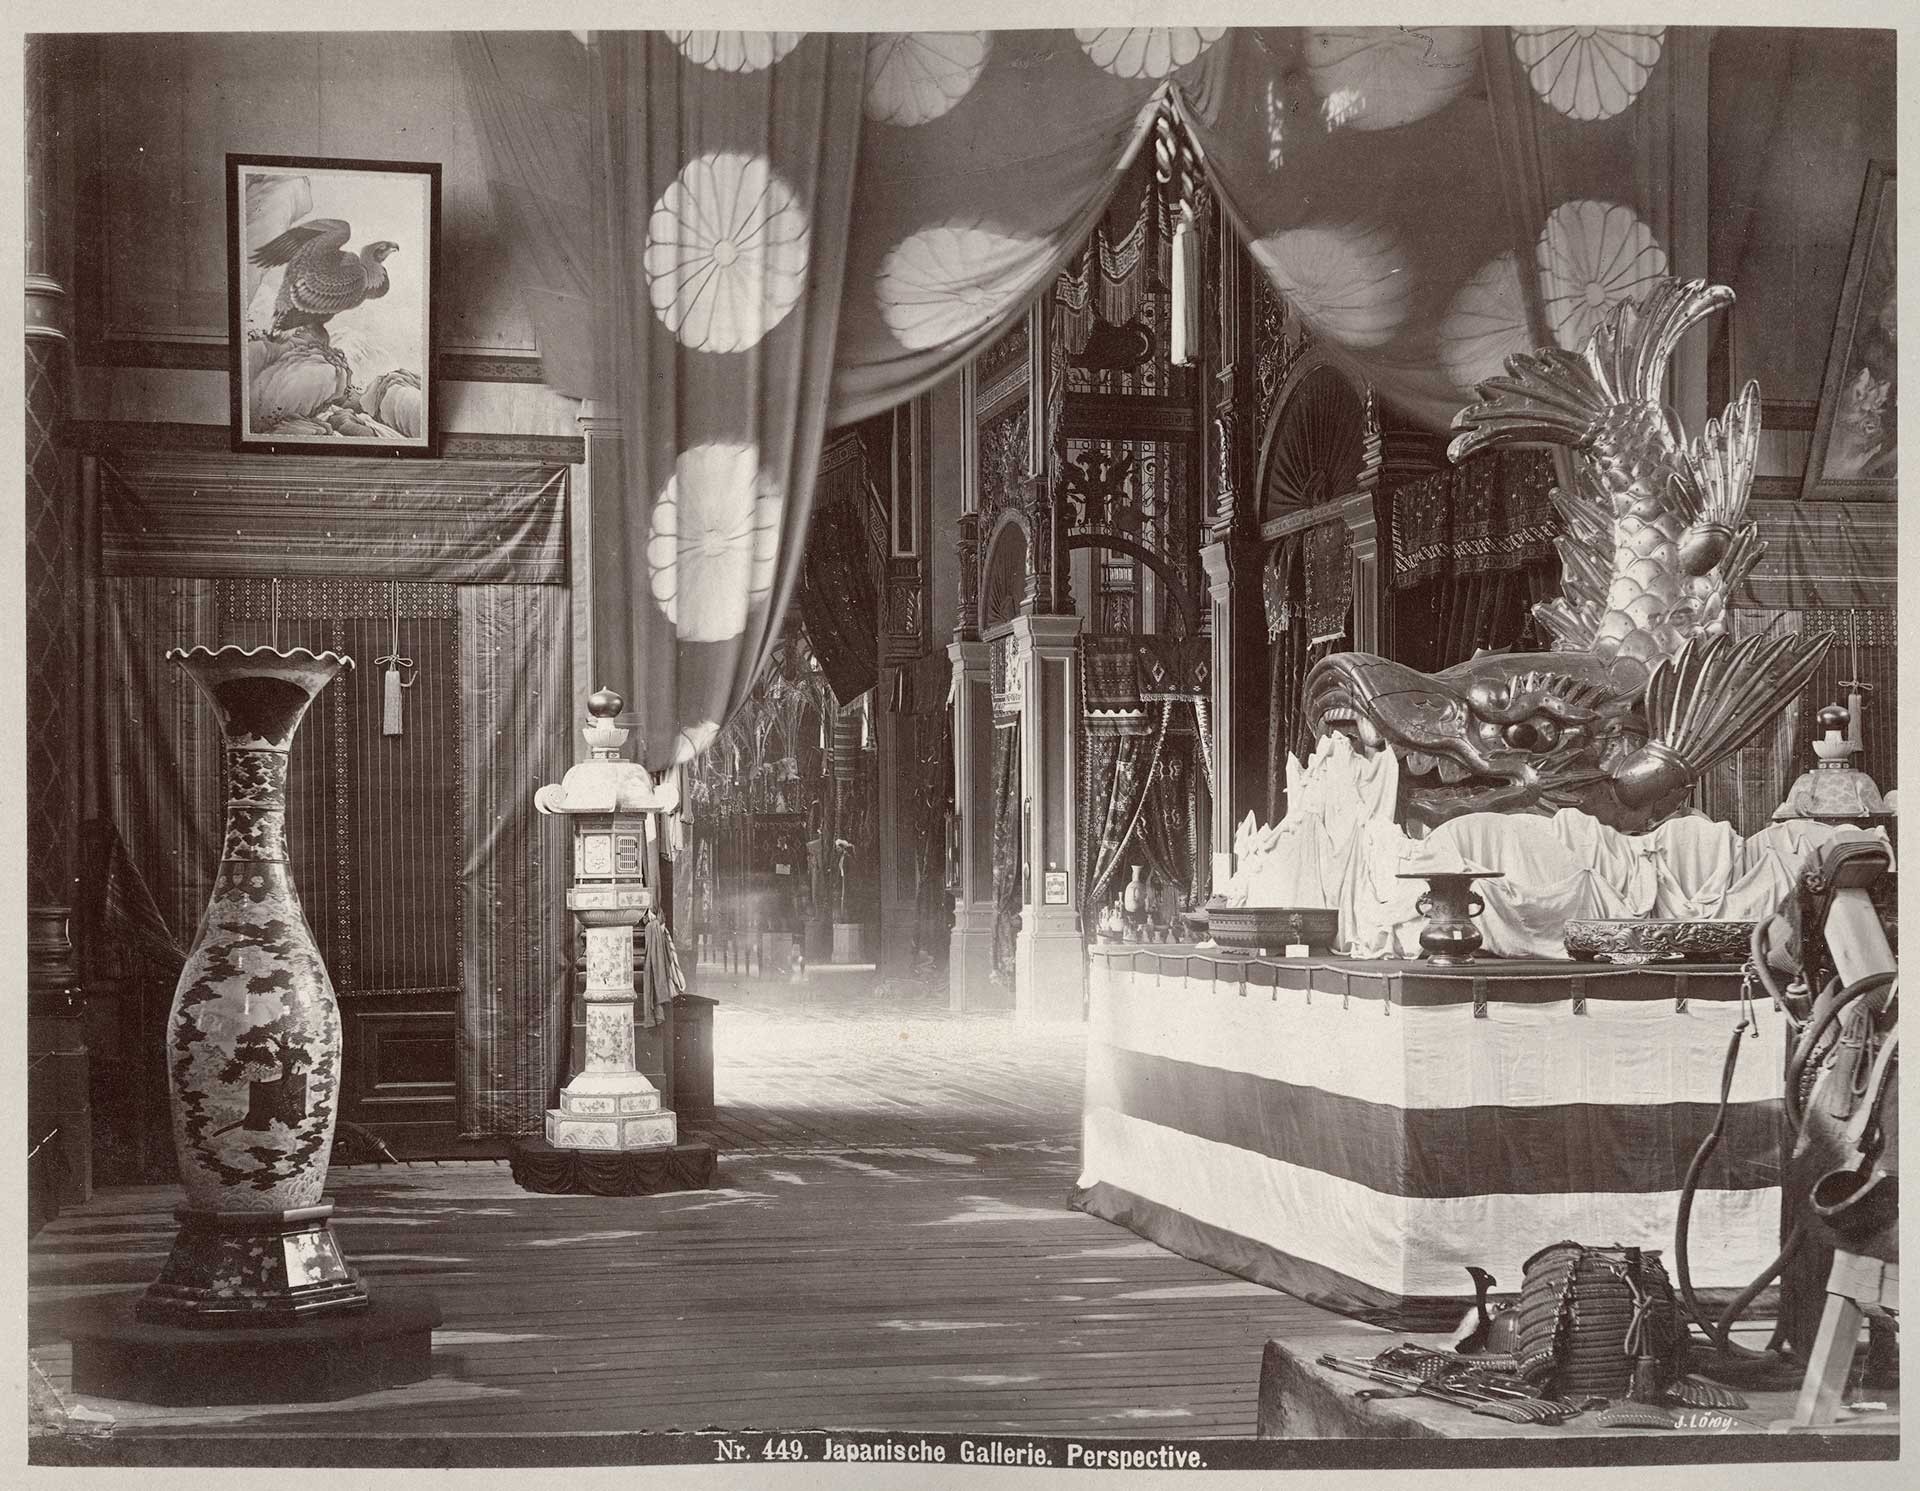 Black and white photo of a room with Japanese objects